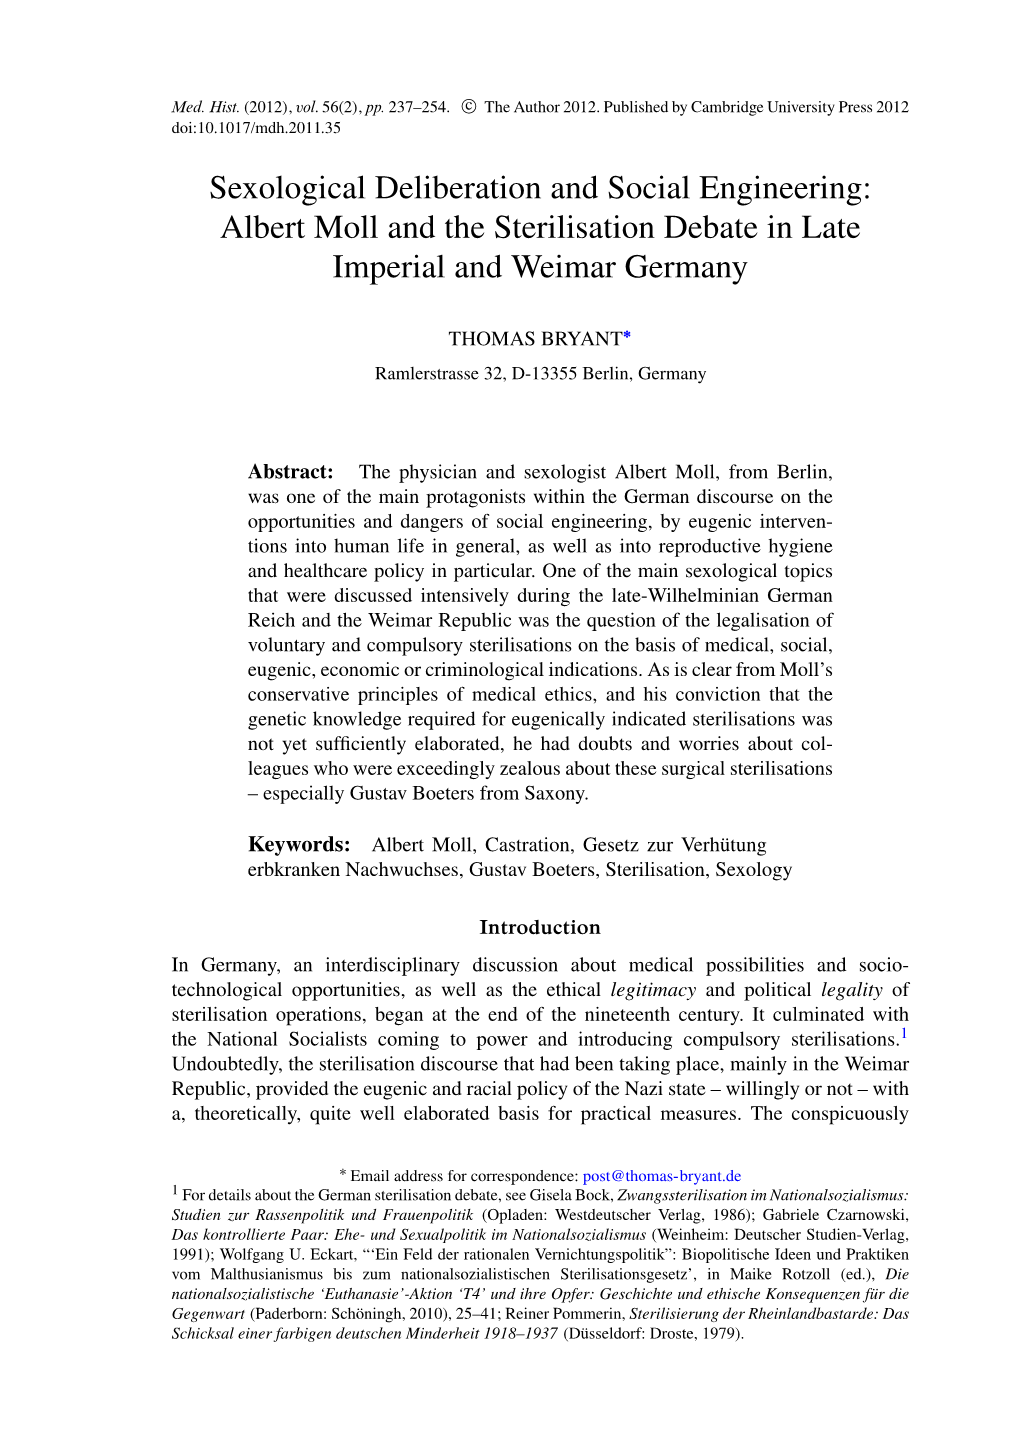 Albert Moll and the Sterilisation Debate in Late Imperial and Weimar Germany